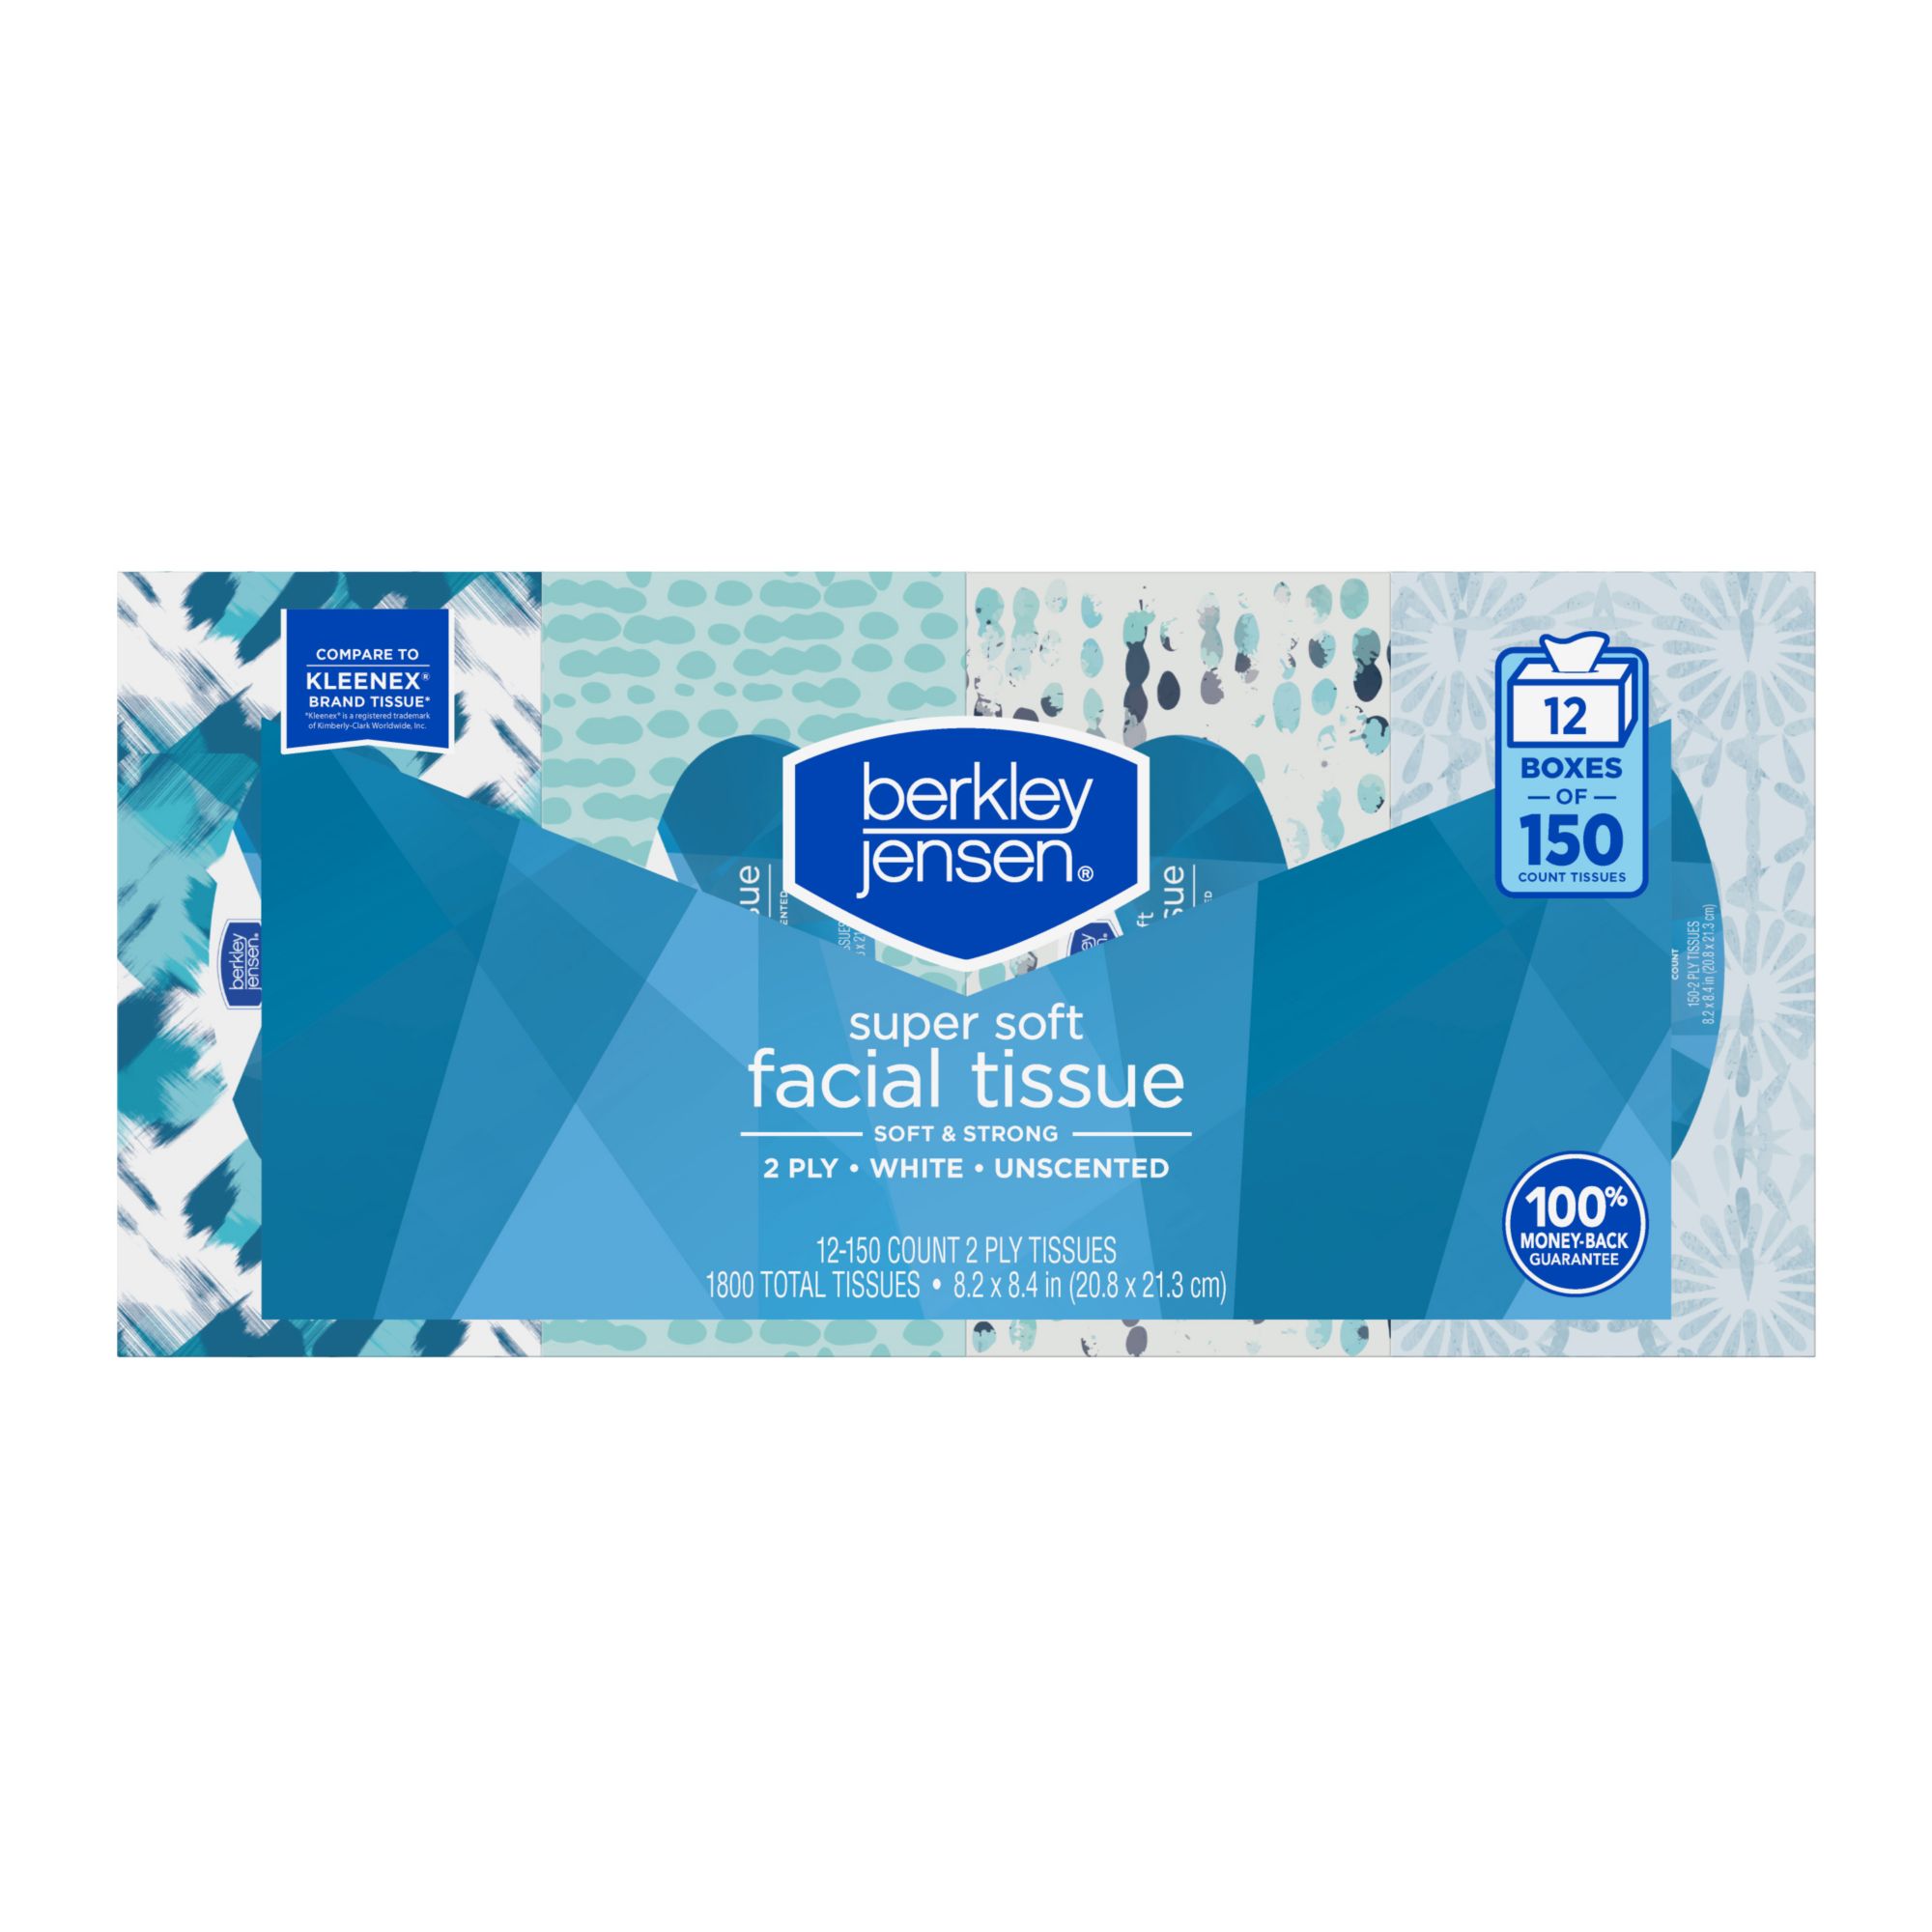 Great Value Everyday Soft 2-Ply Facial Tissues, 160 Tissues 